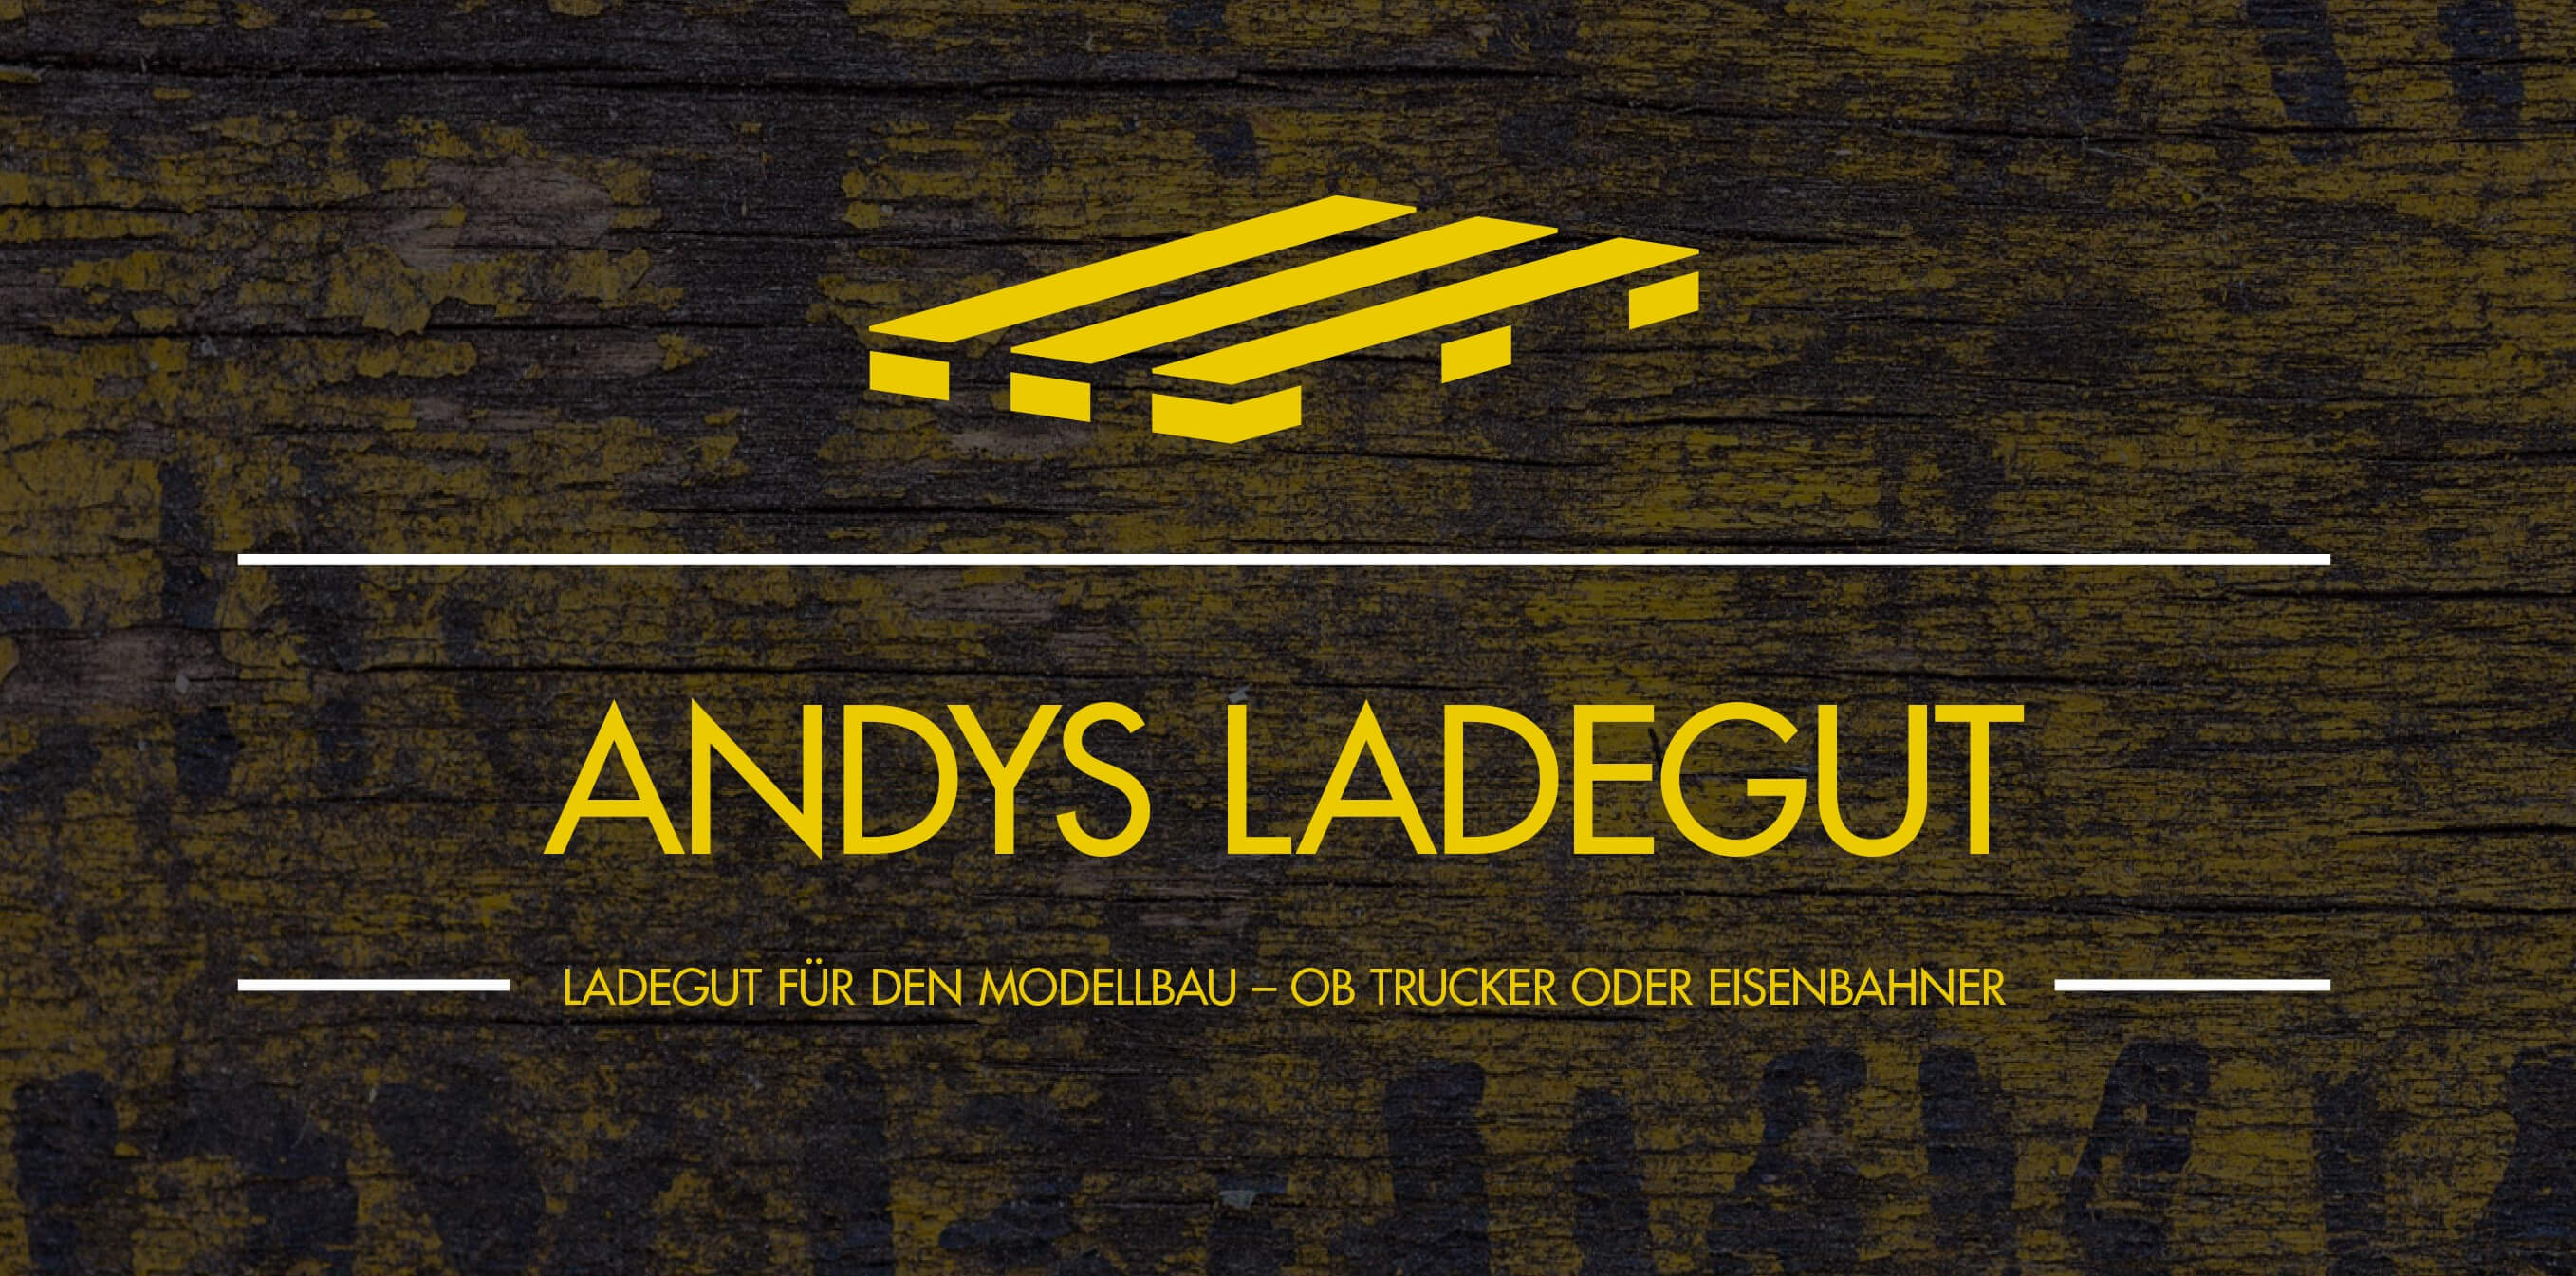 Andys cargo